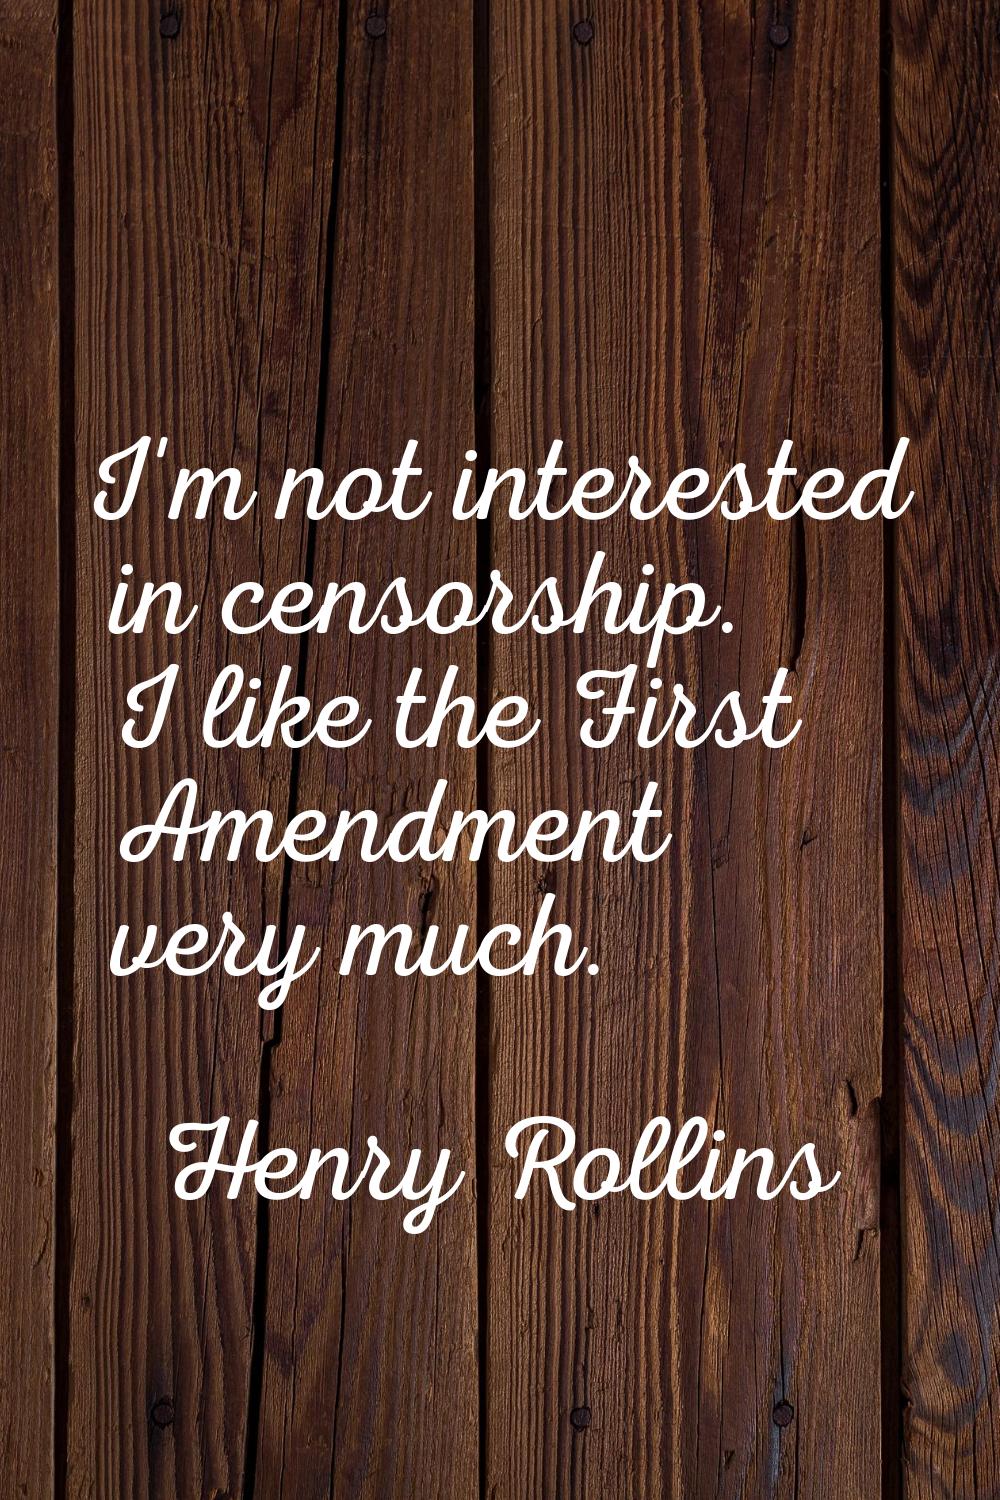 I'm not interested in censorship. I like the First Amendment very much.